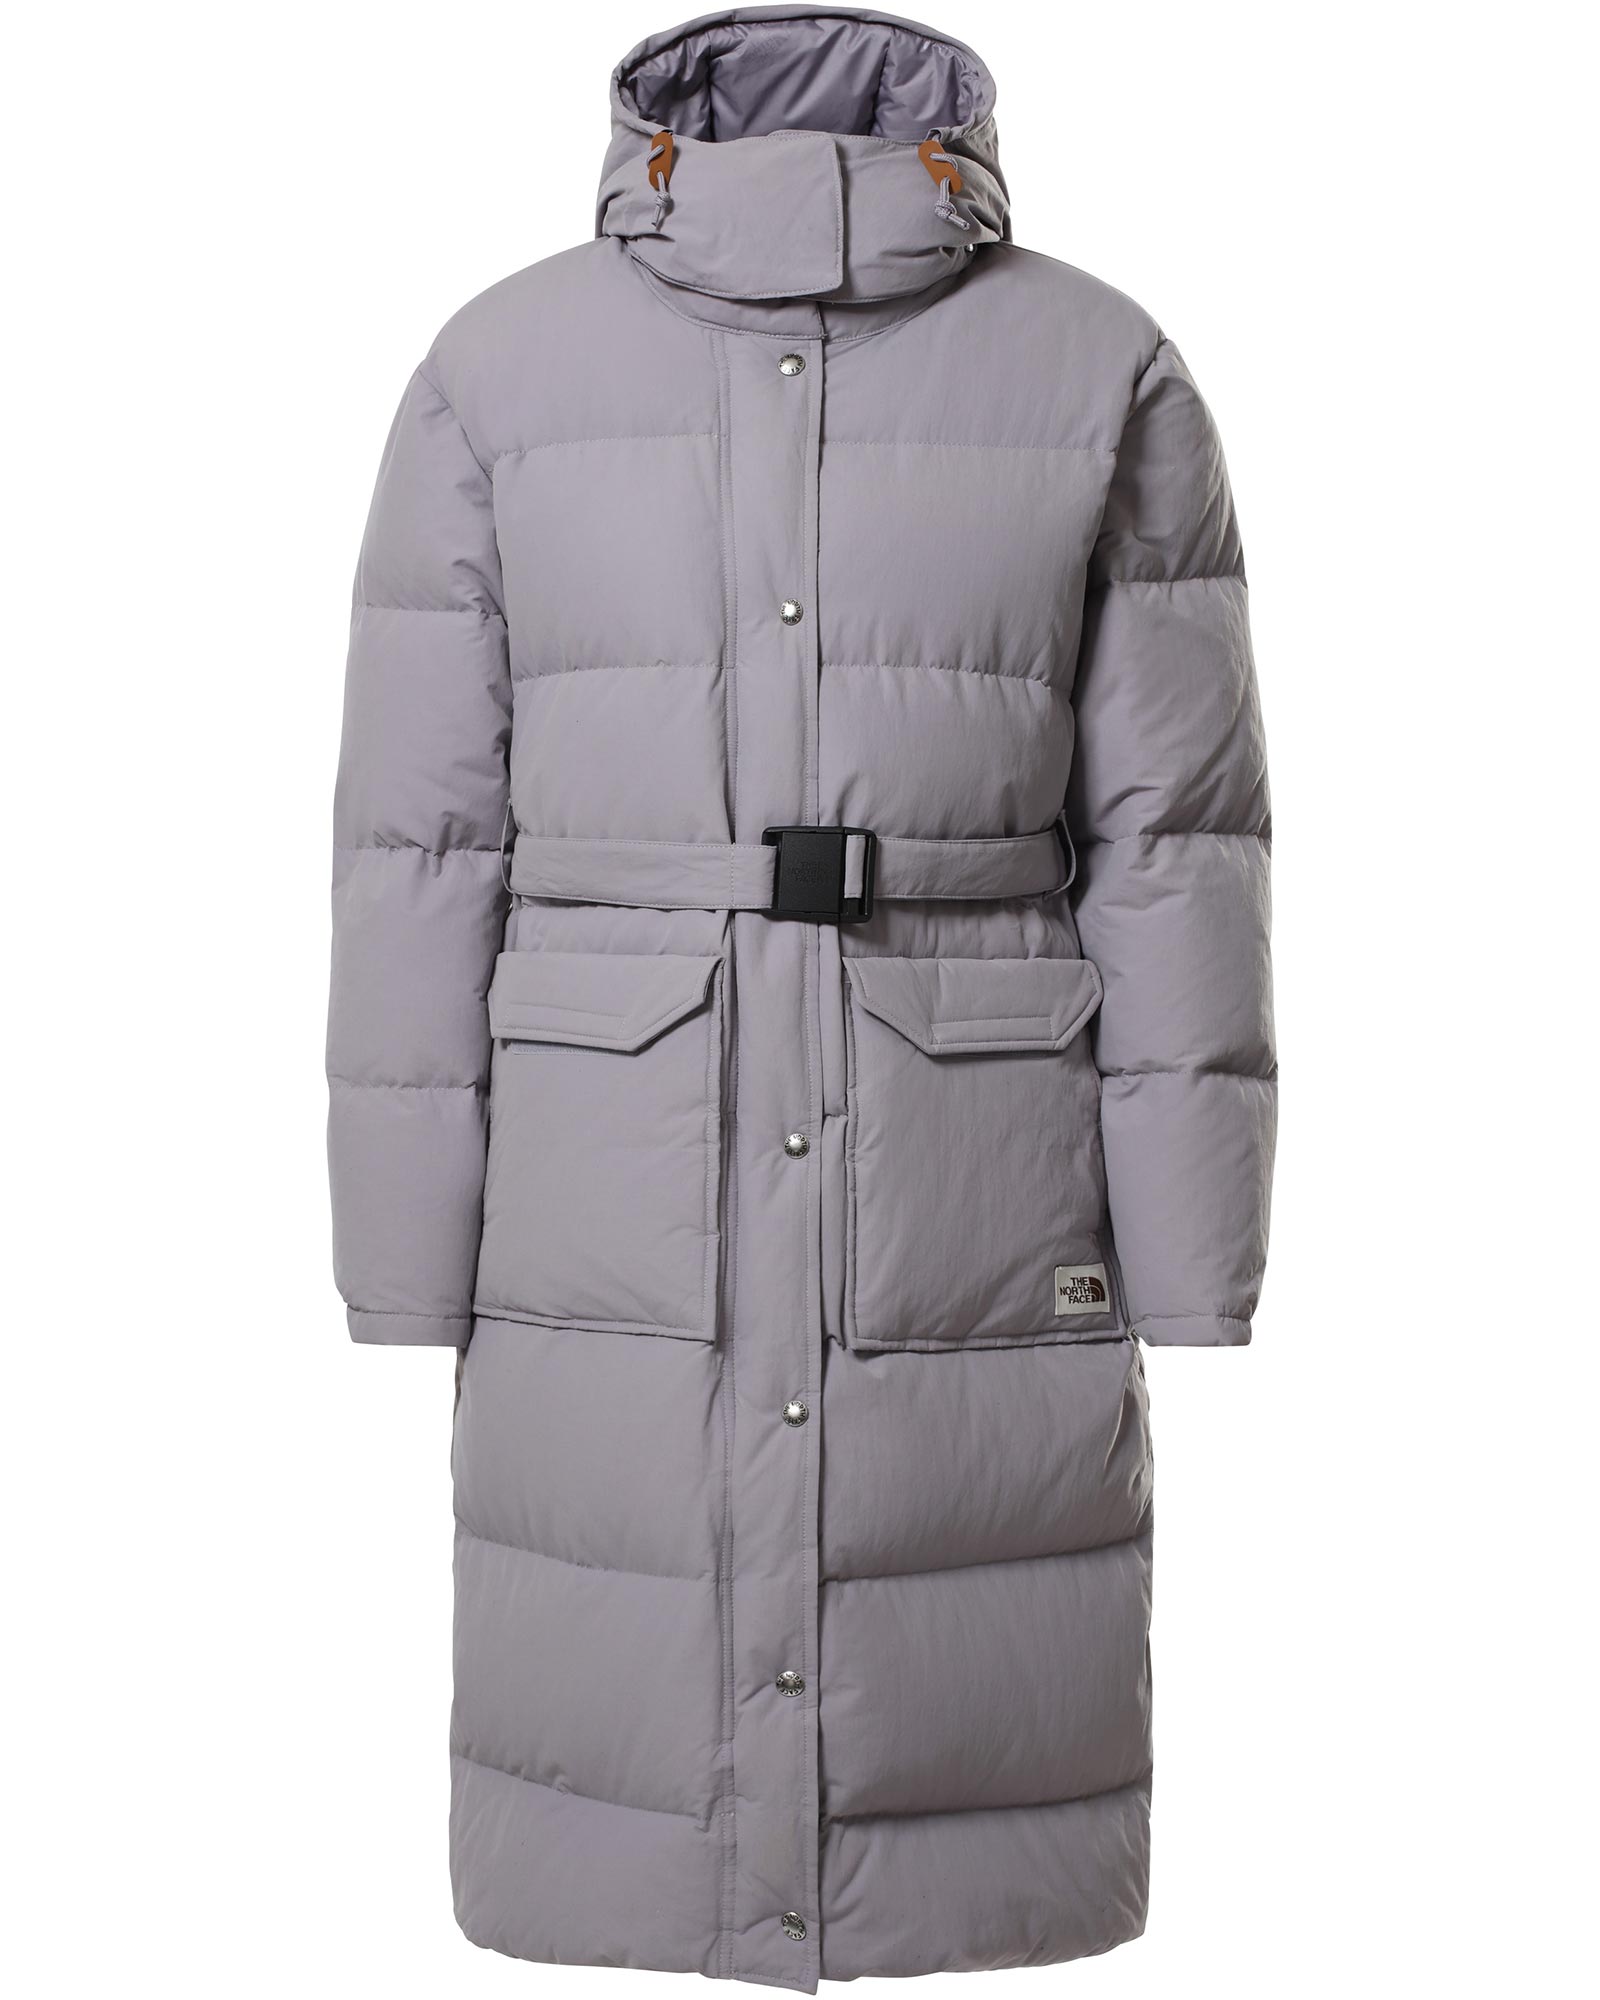 The North Face Sierra Womens Down Long Parka Jacket